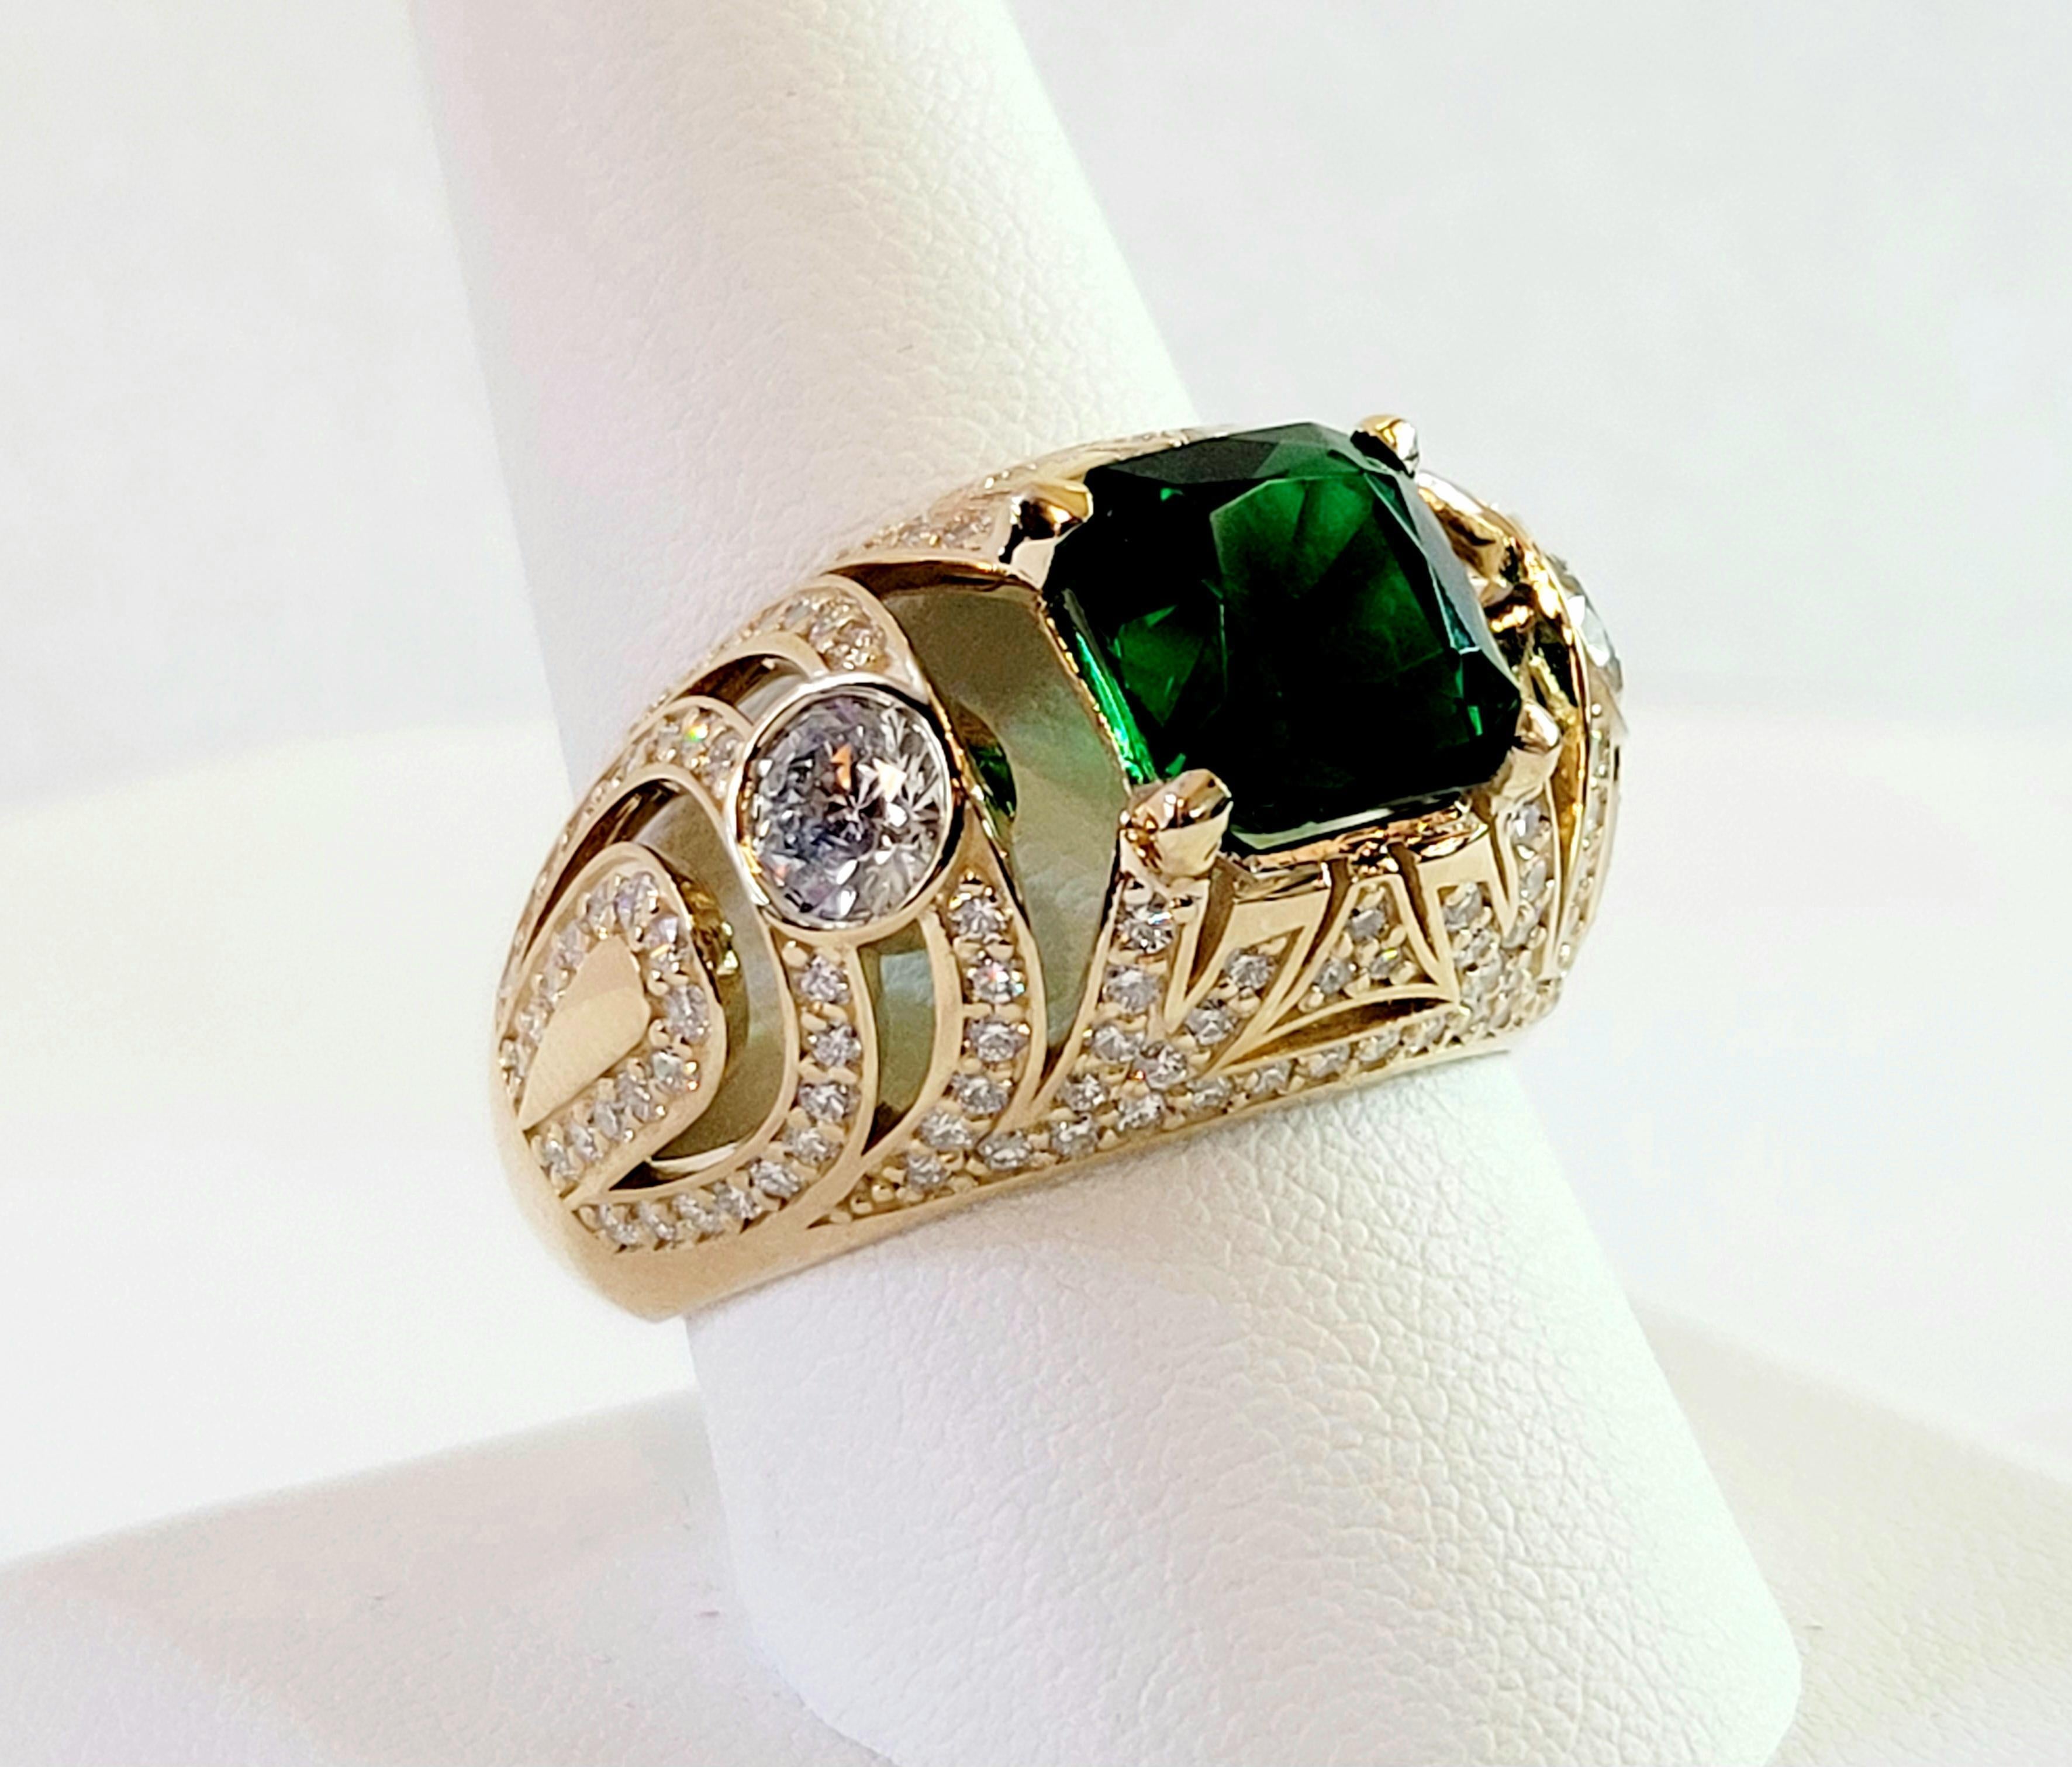 Hand Made Ring with Diamonds 
Ring Size 10.25 
Material 14K Yellow Gold
Center stone Emerald
Emerald: CZ , dimension 9 x 9mm 
2 stone: .35ct each, 70ct total
Diamonds:2.5ct
Total Carat: 3.20ct
Diamond Clarity VS
Color Grade G
Weight: 12.4gr 